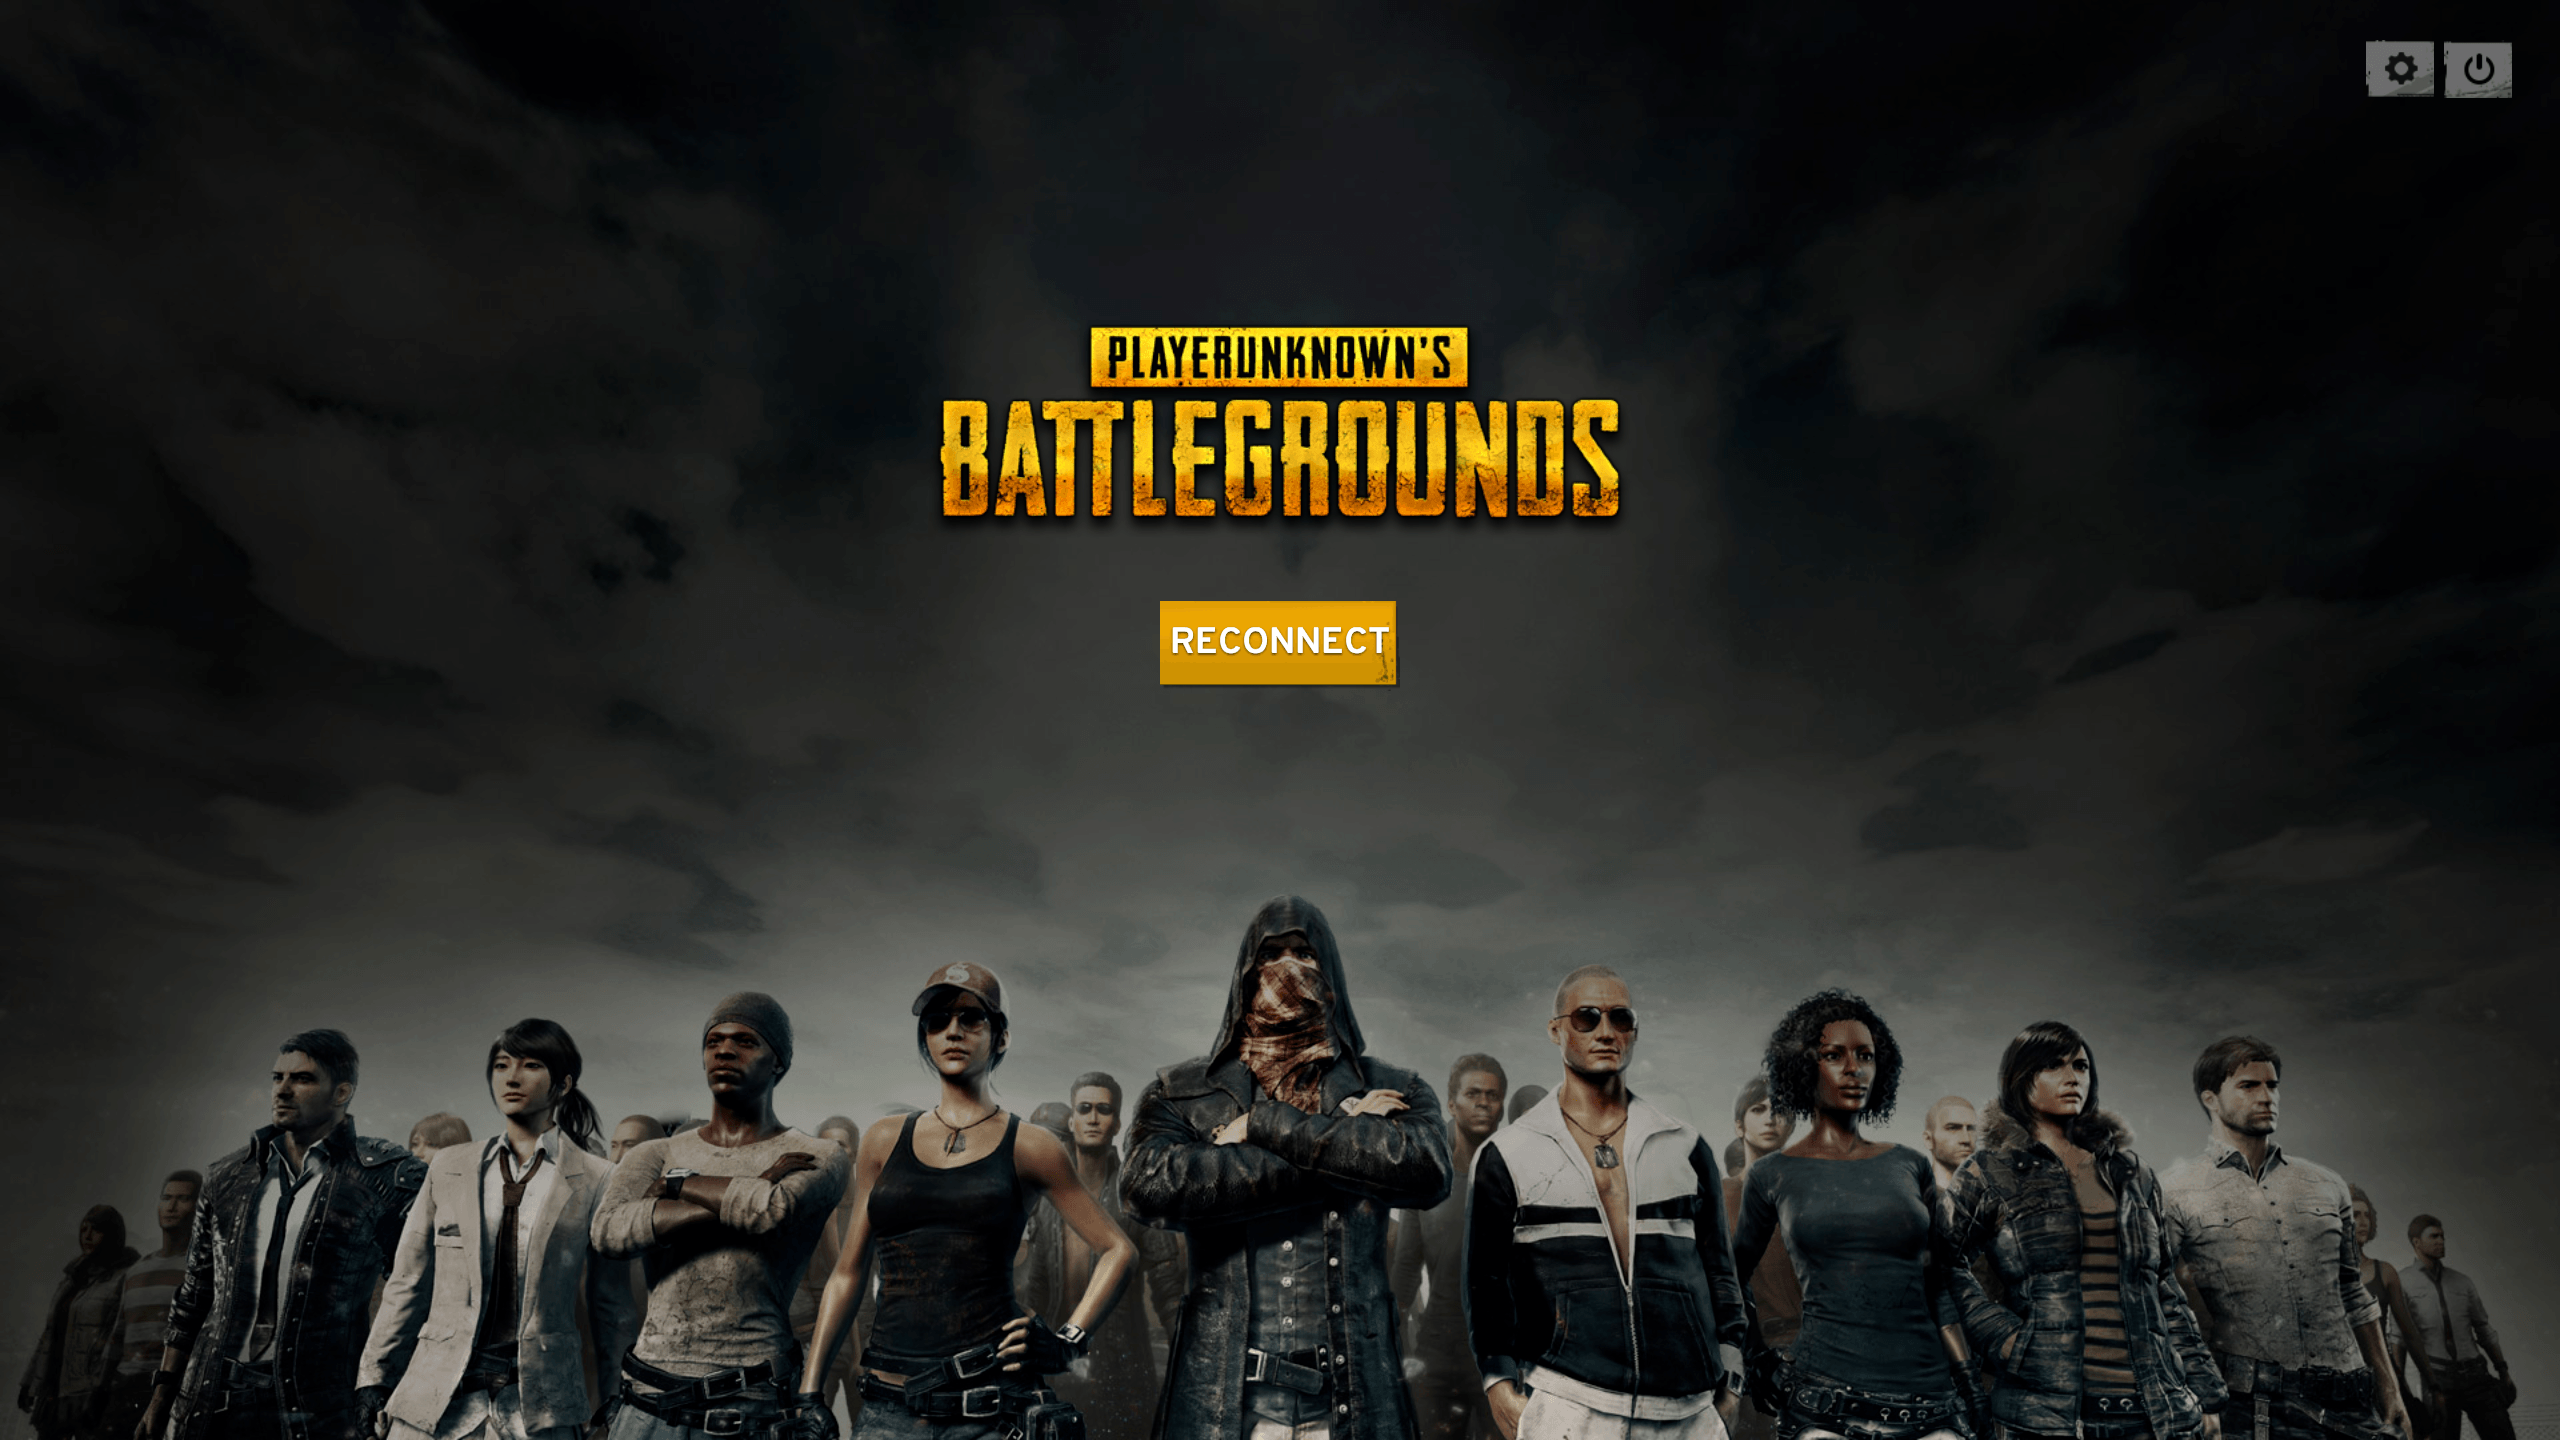 Start Screen Game Pubg Wallpaper for Phone and HD Desktop Background